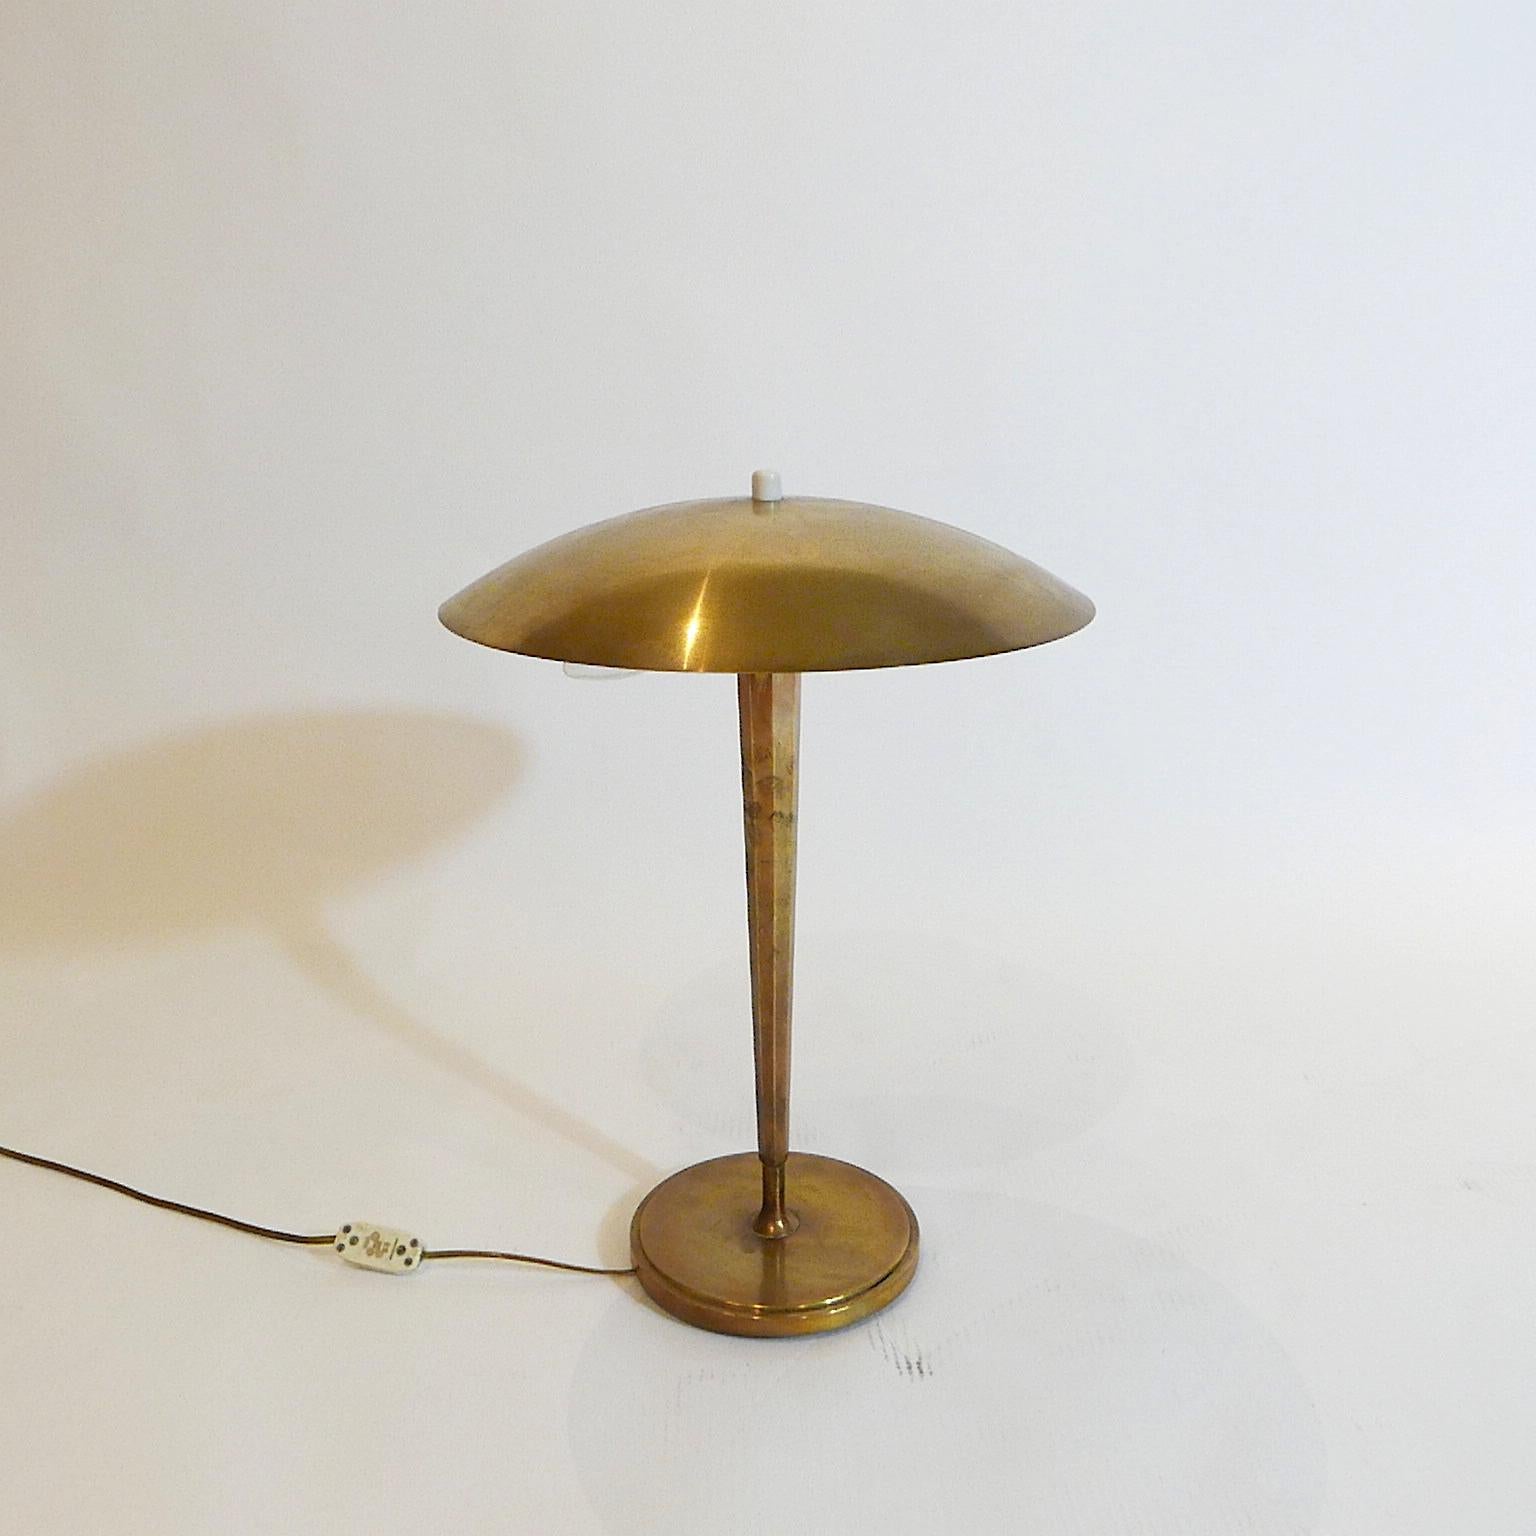 Suburb Quality Scandinavian Brass Table/Desk lamp by Bohlmark after Paavo Tynell 1